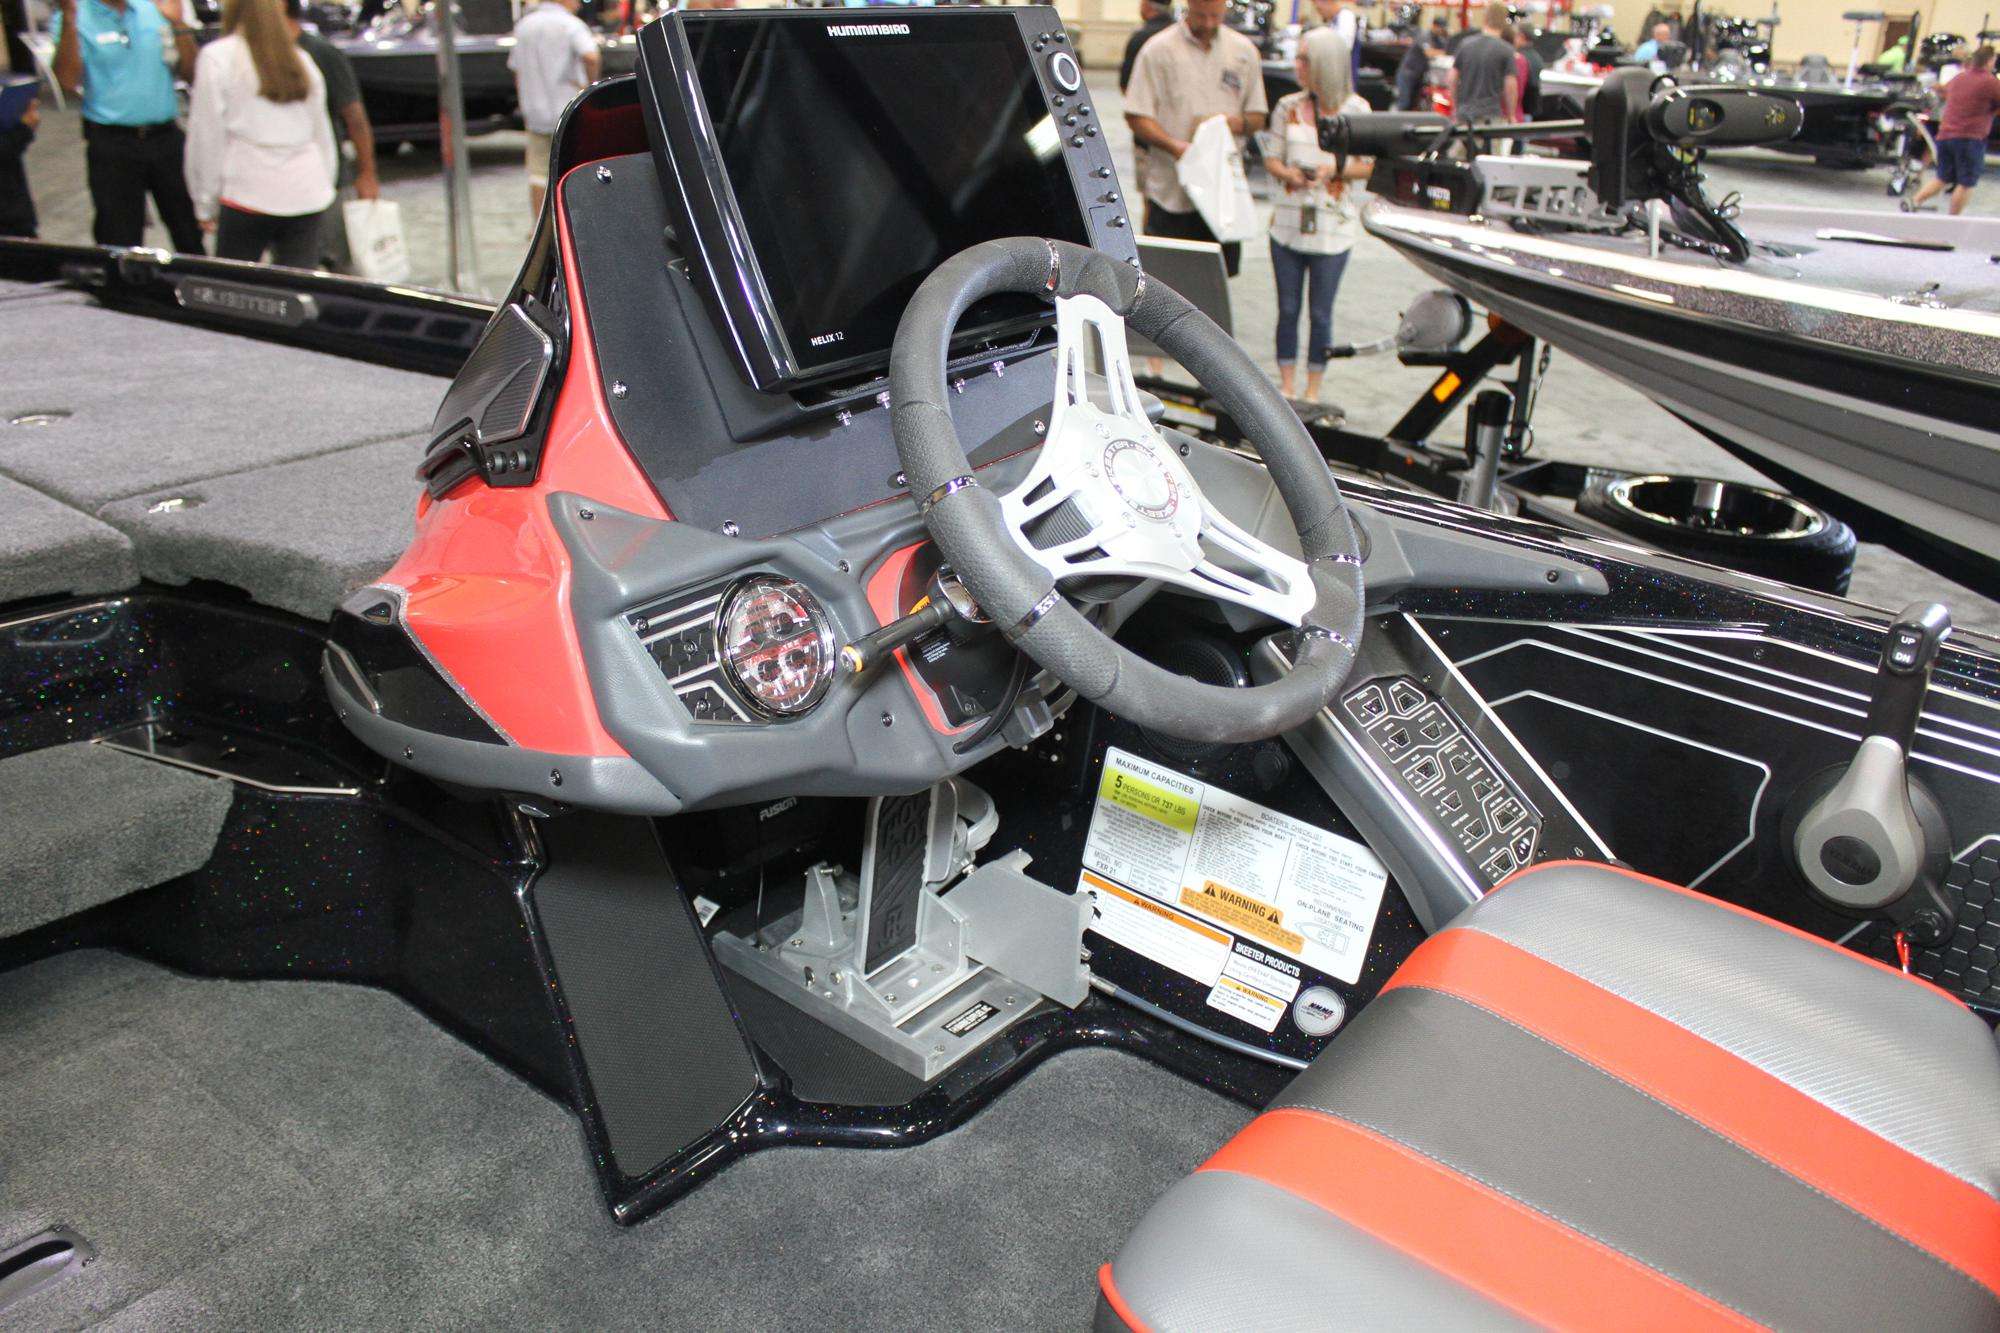 A Sleek new console, with new steering wheel andâ¦